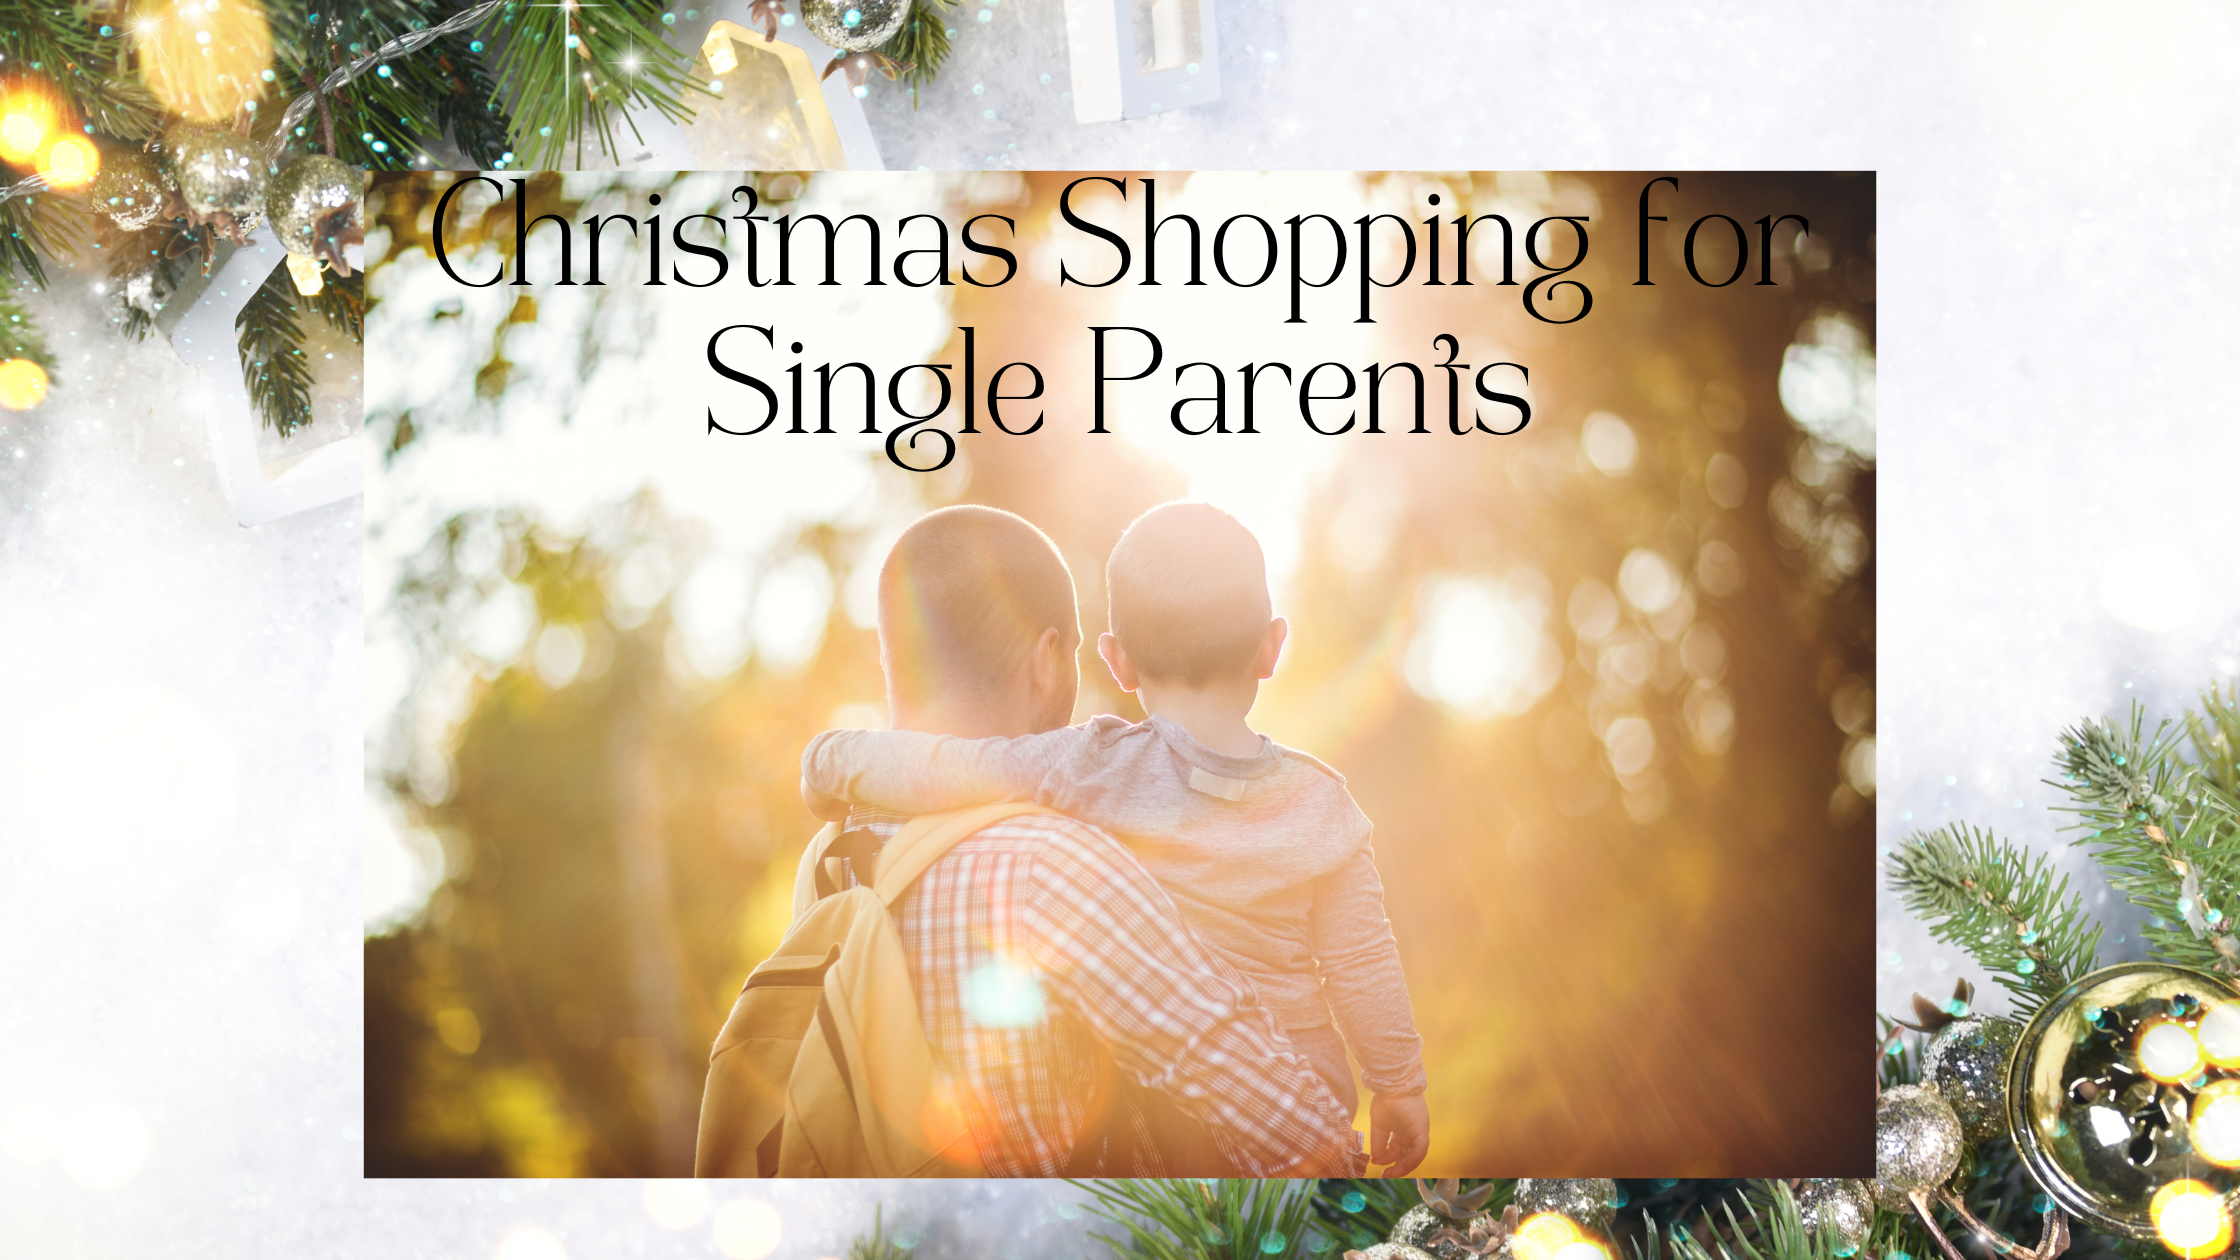 Christmas Shopping for Single Parents: How to make the most of your money and budget this festive season.